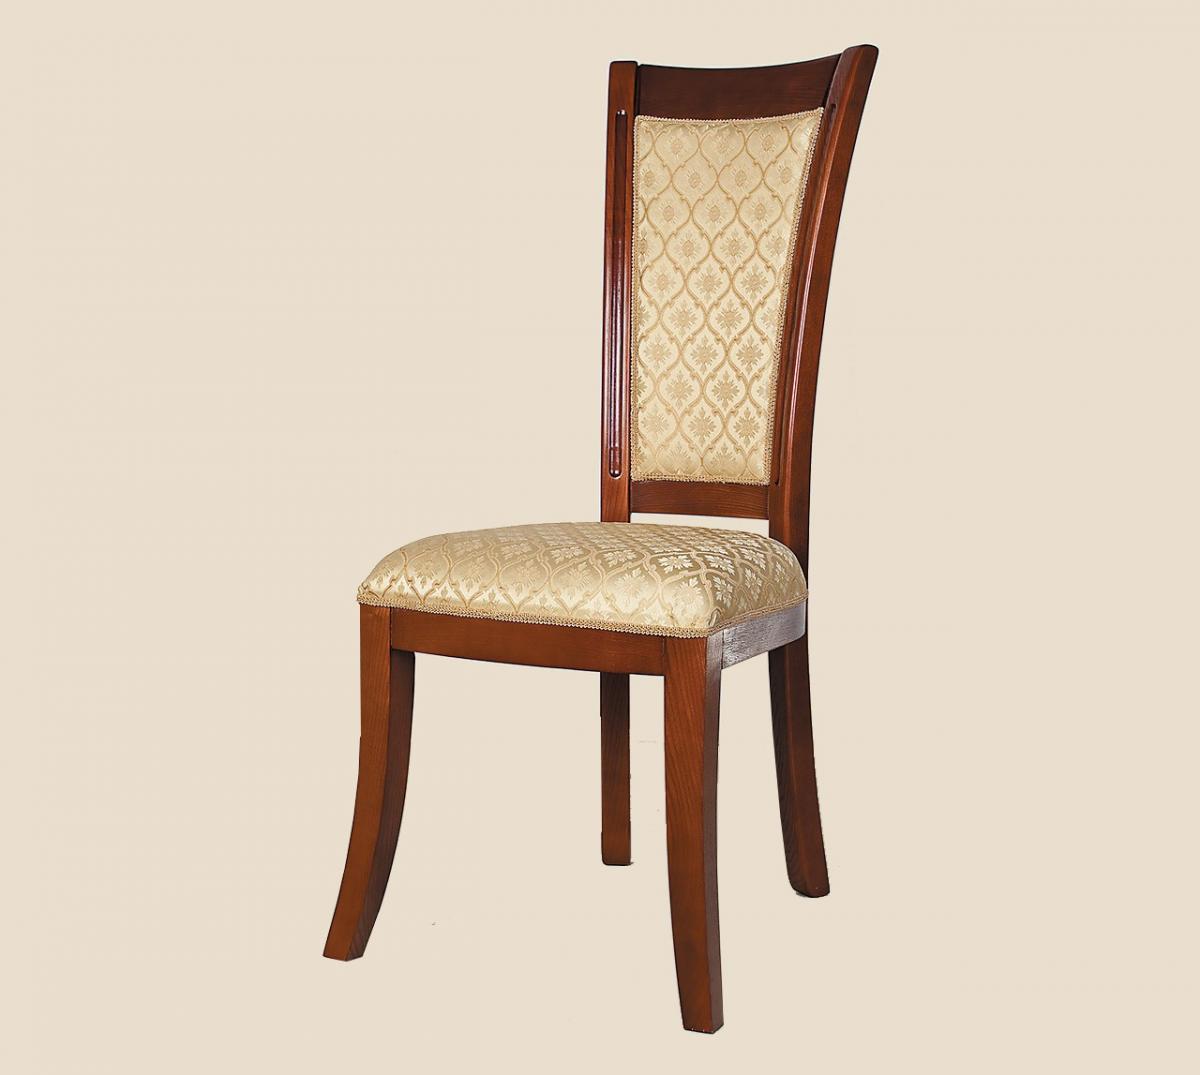 Chair "Classic" with a straight leg